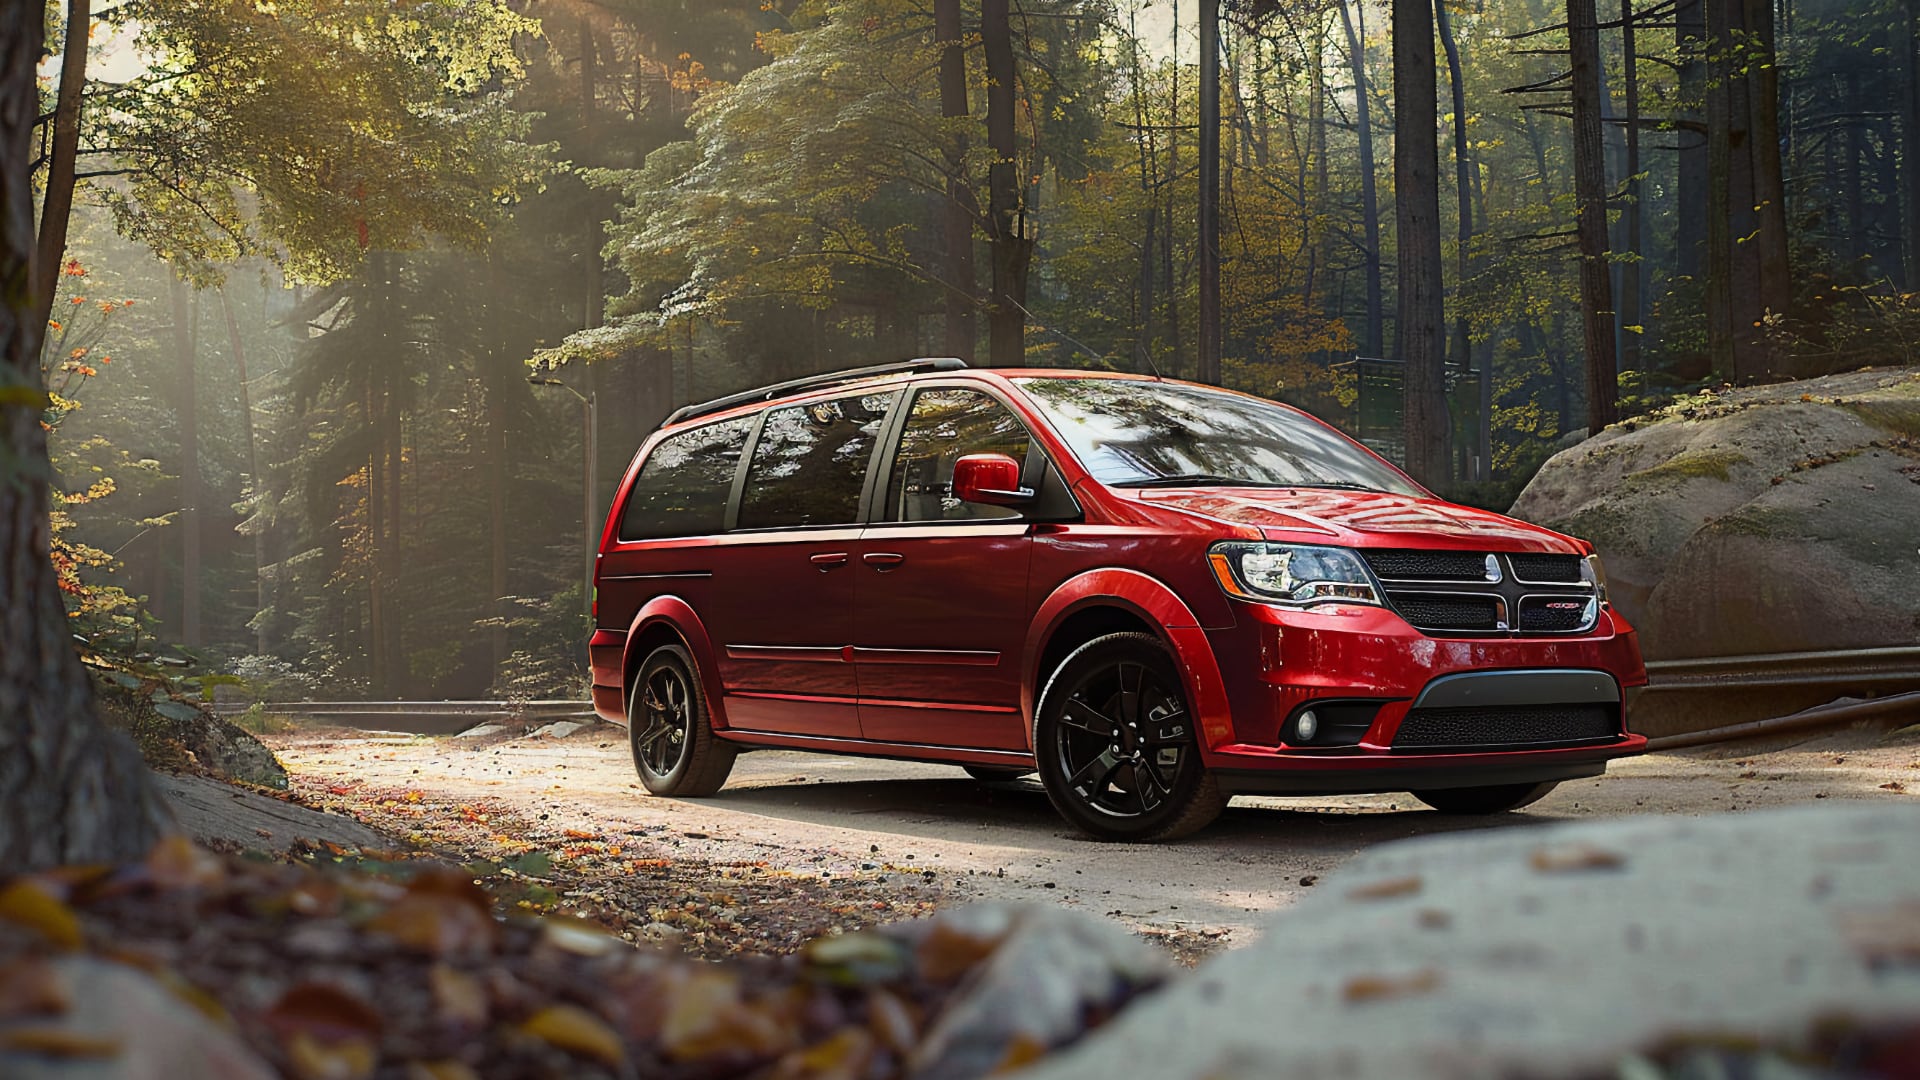 A red 2019 Dodge Grand Caravan parked in the woods.